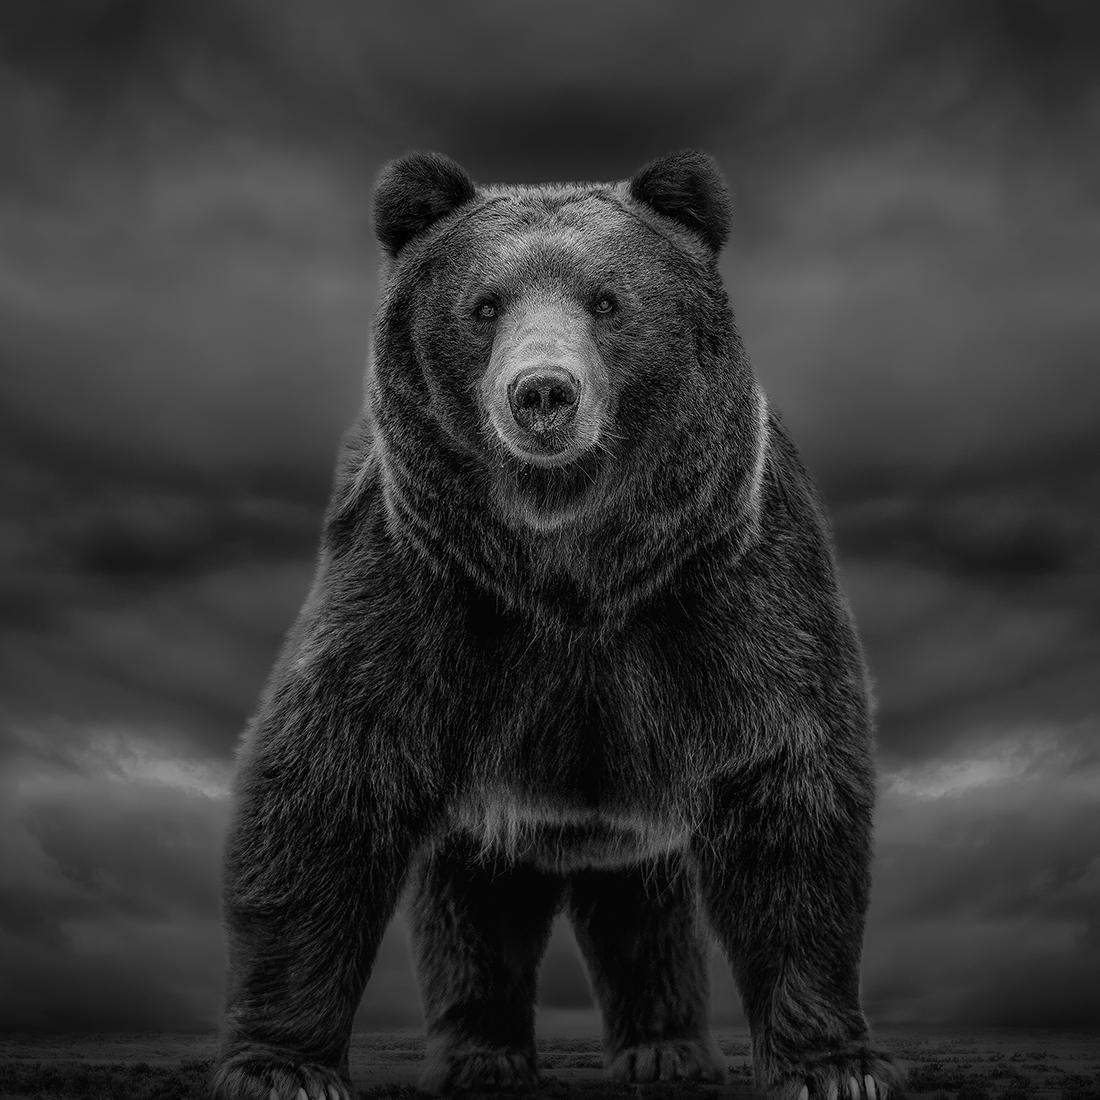 Brown Bear 2019
Unsigned 
Archival pigment paper
Framing available. Inquire for rates. 


Shane Russeck has built a reputation for capturing America's landscapes, cultures and endangered animals. Born in Philadelphia in 1977, Shane's background in